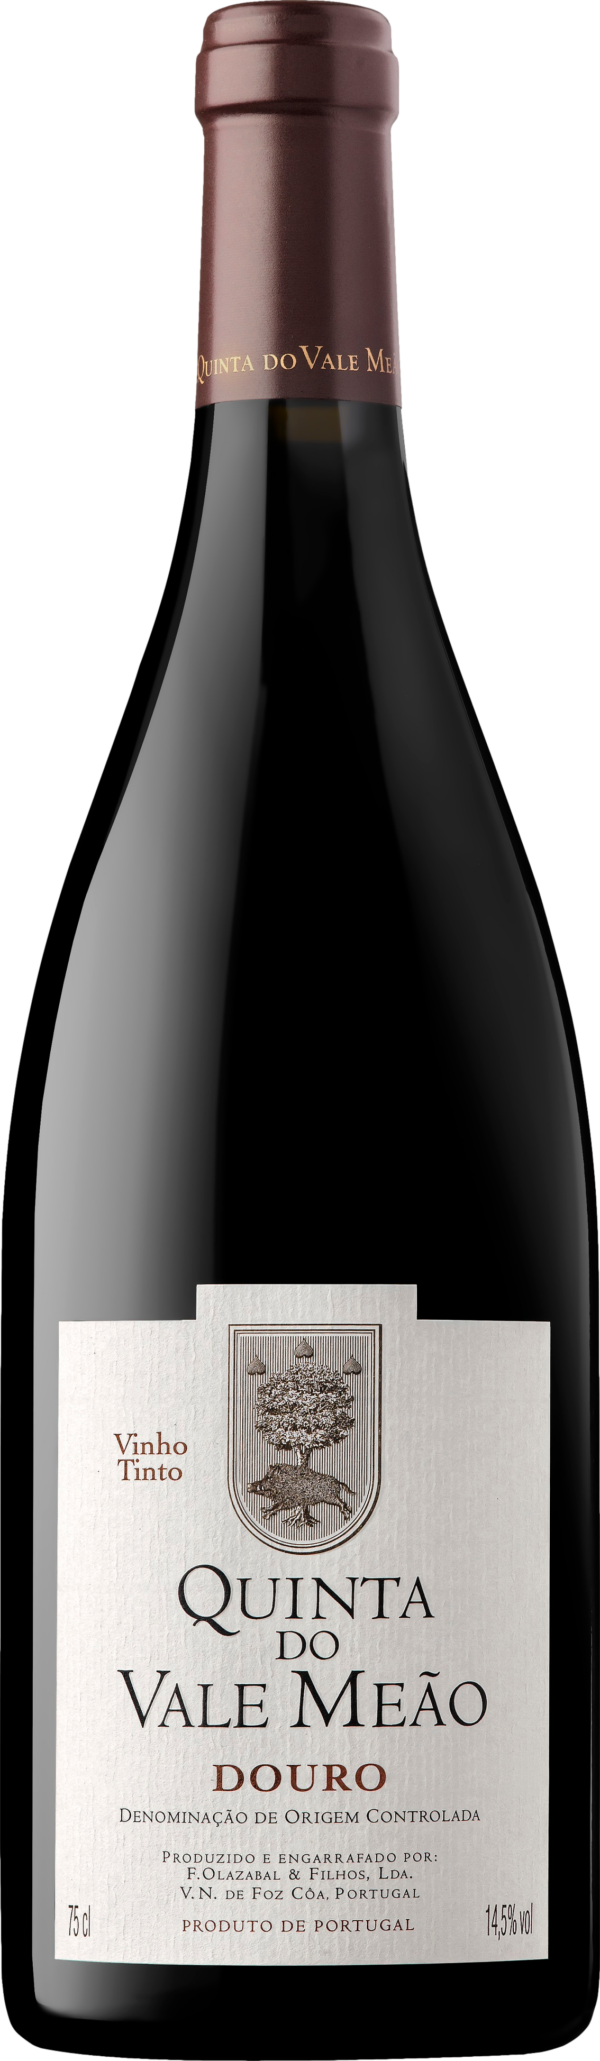 Product image of Quinta do Vale Meao Douro Tinto 2021 from 8wines